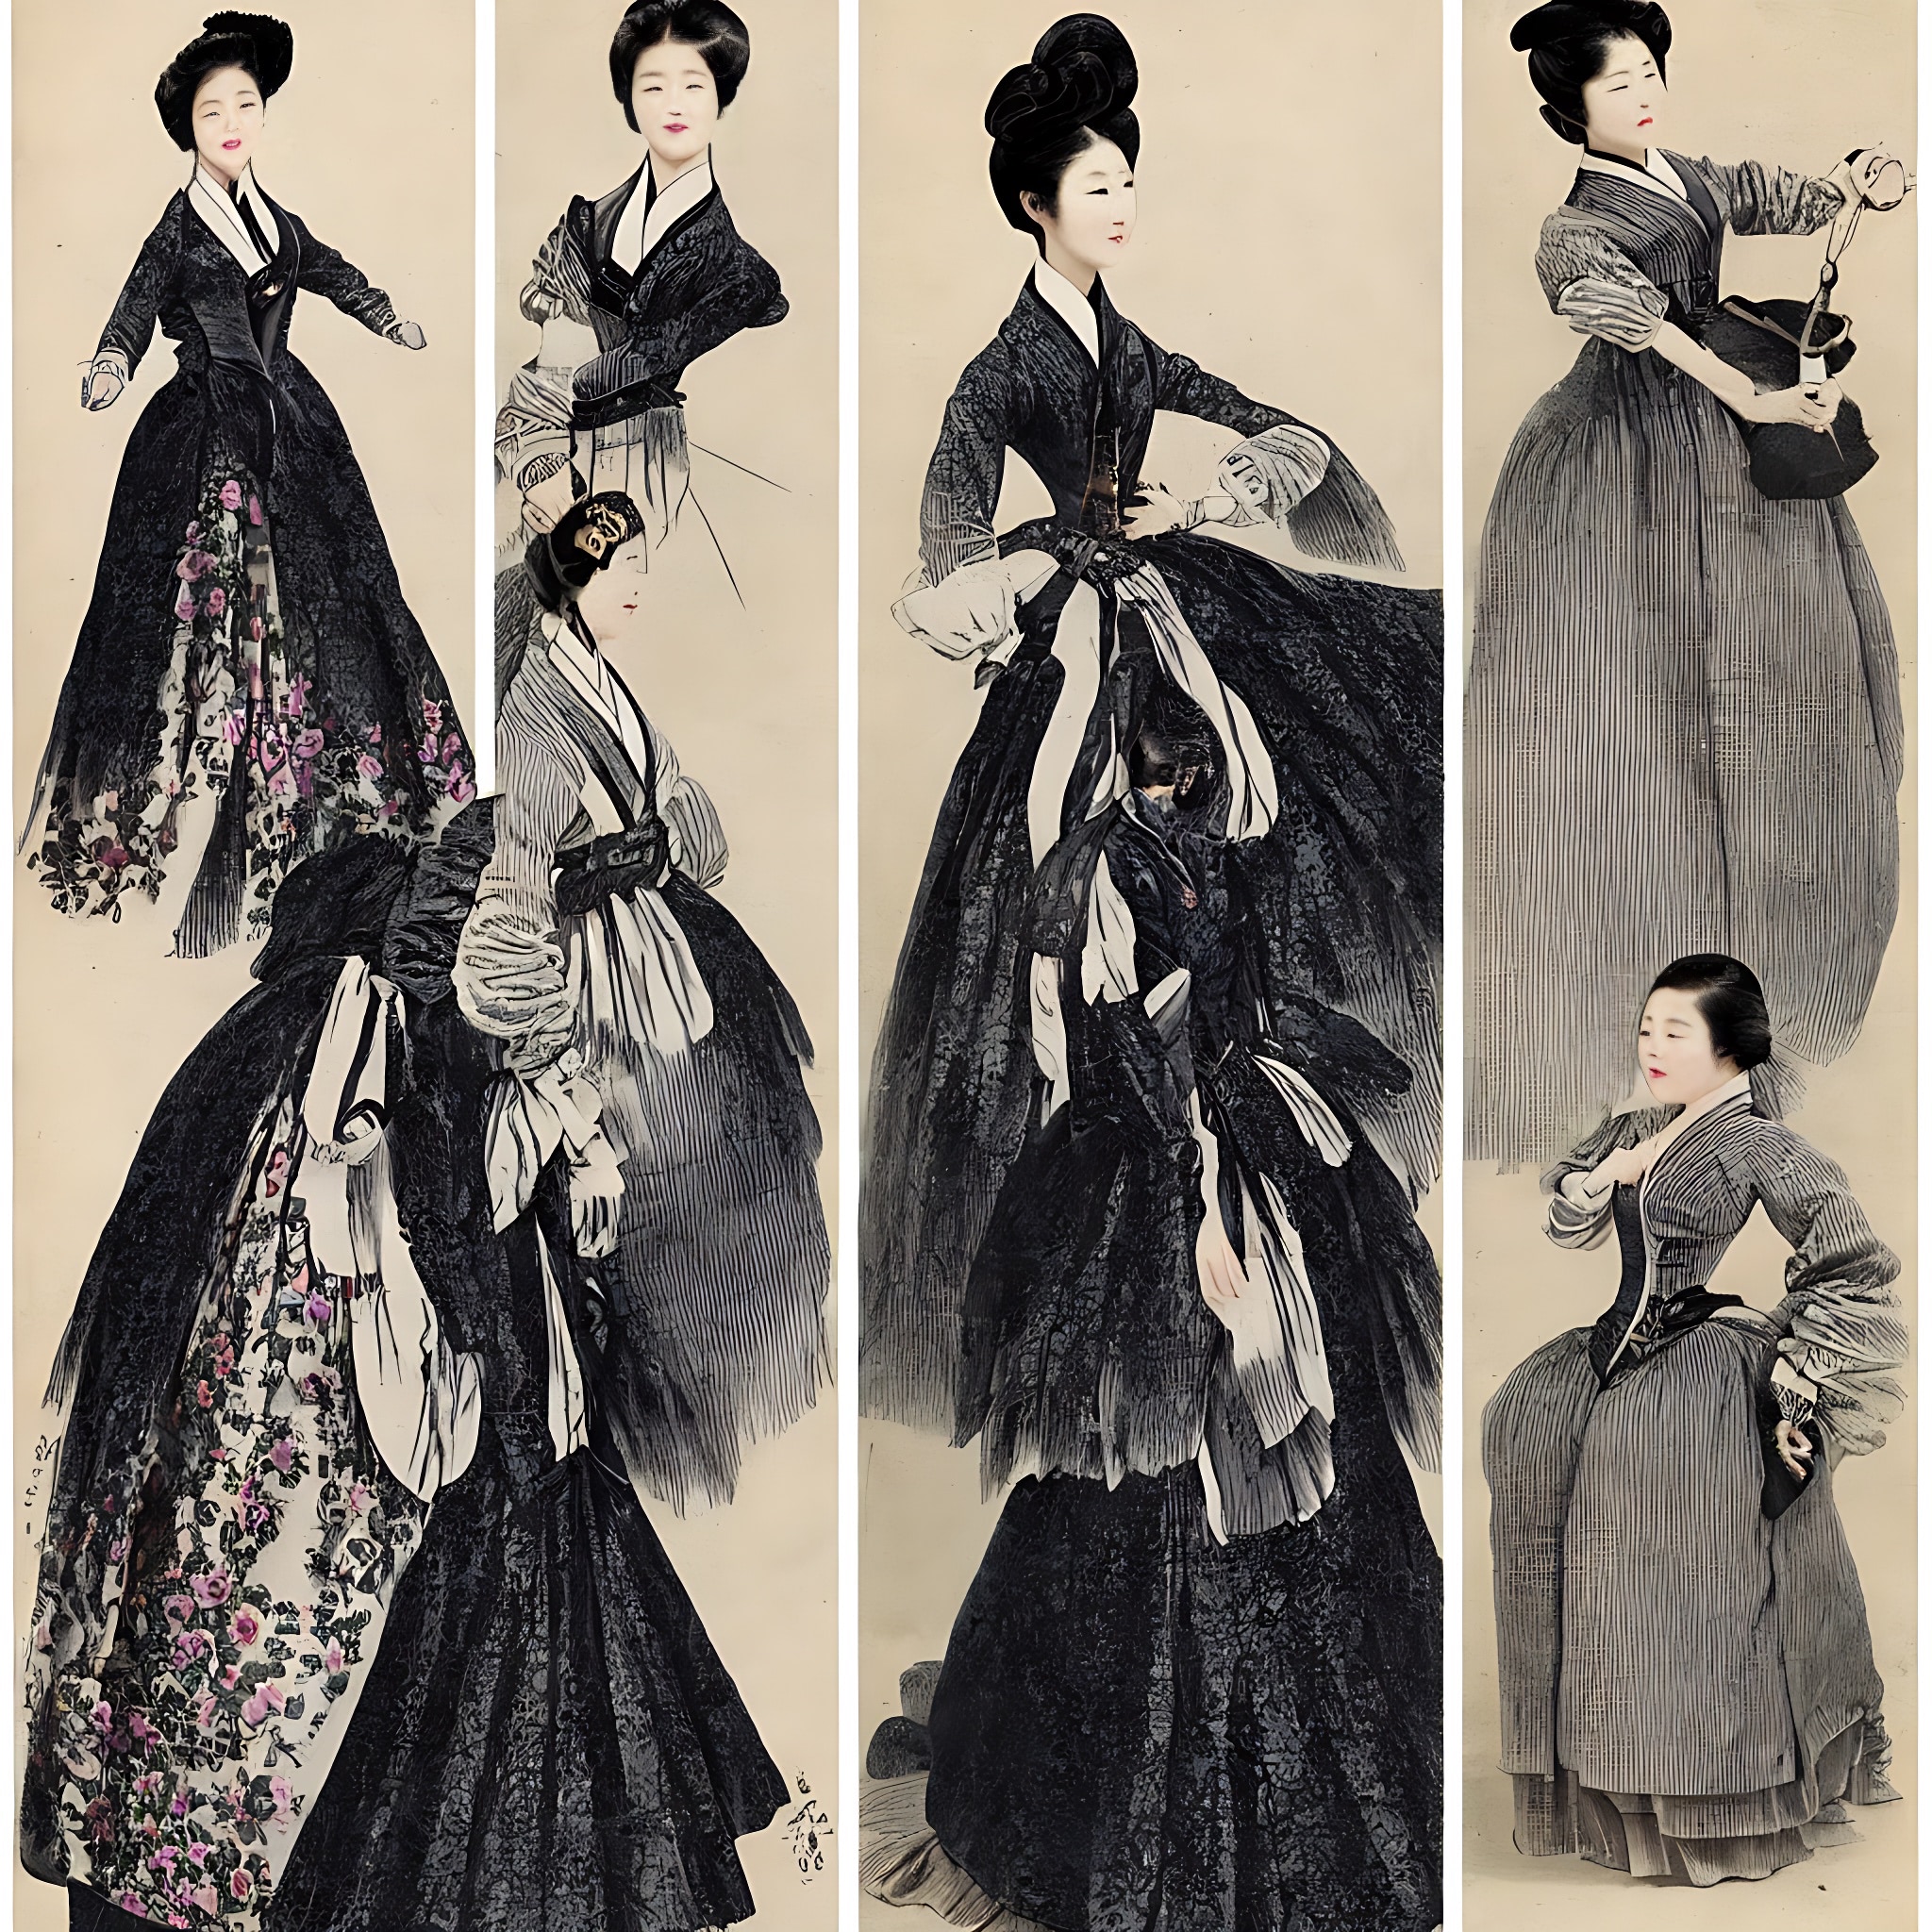 fashion-advertisement-for-korea-in-the-1800s